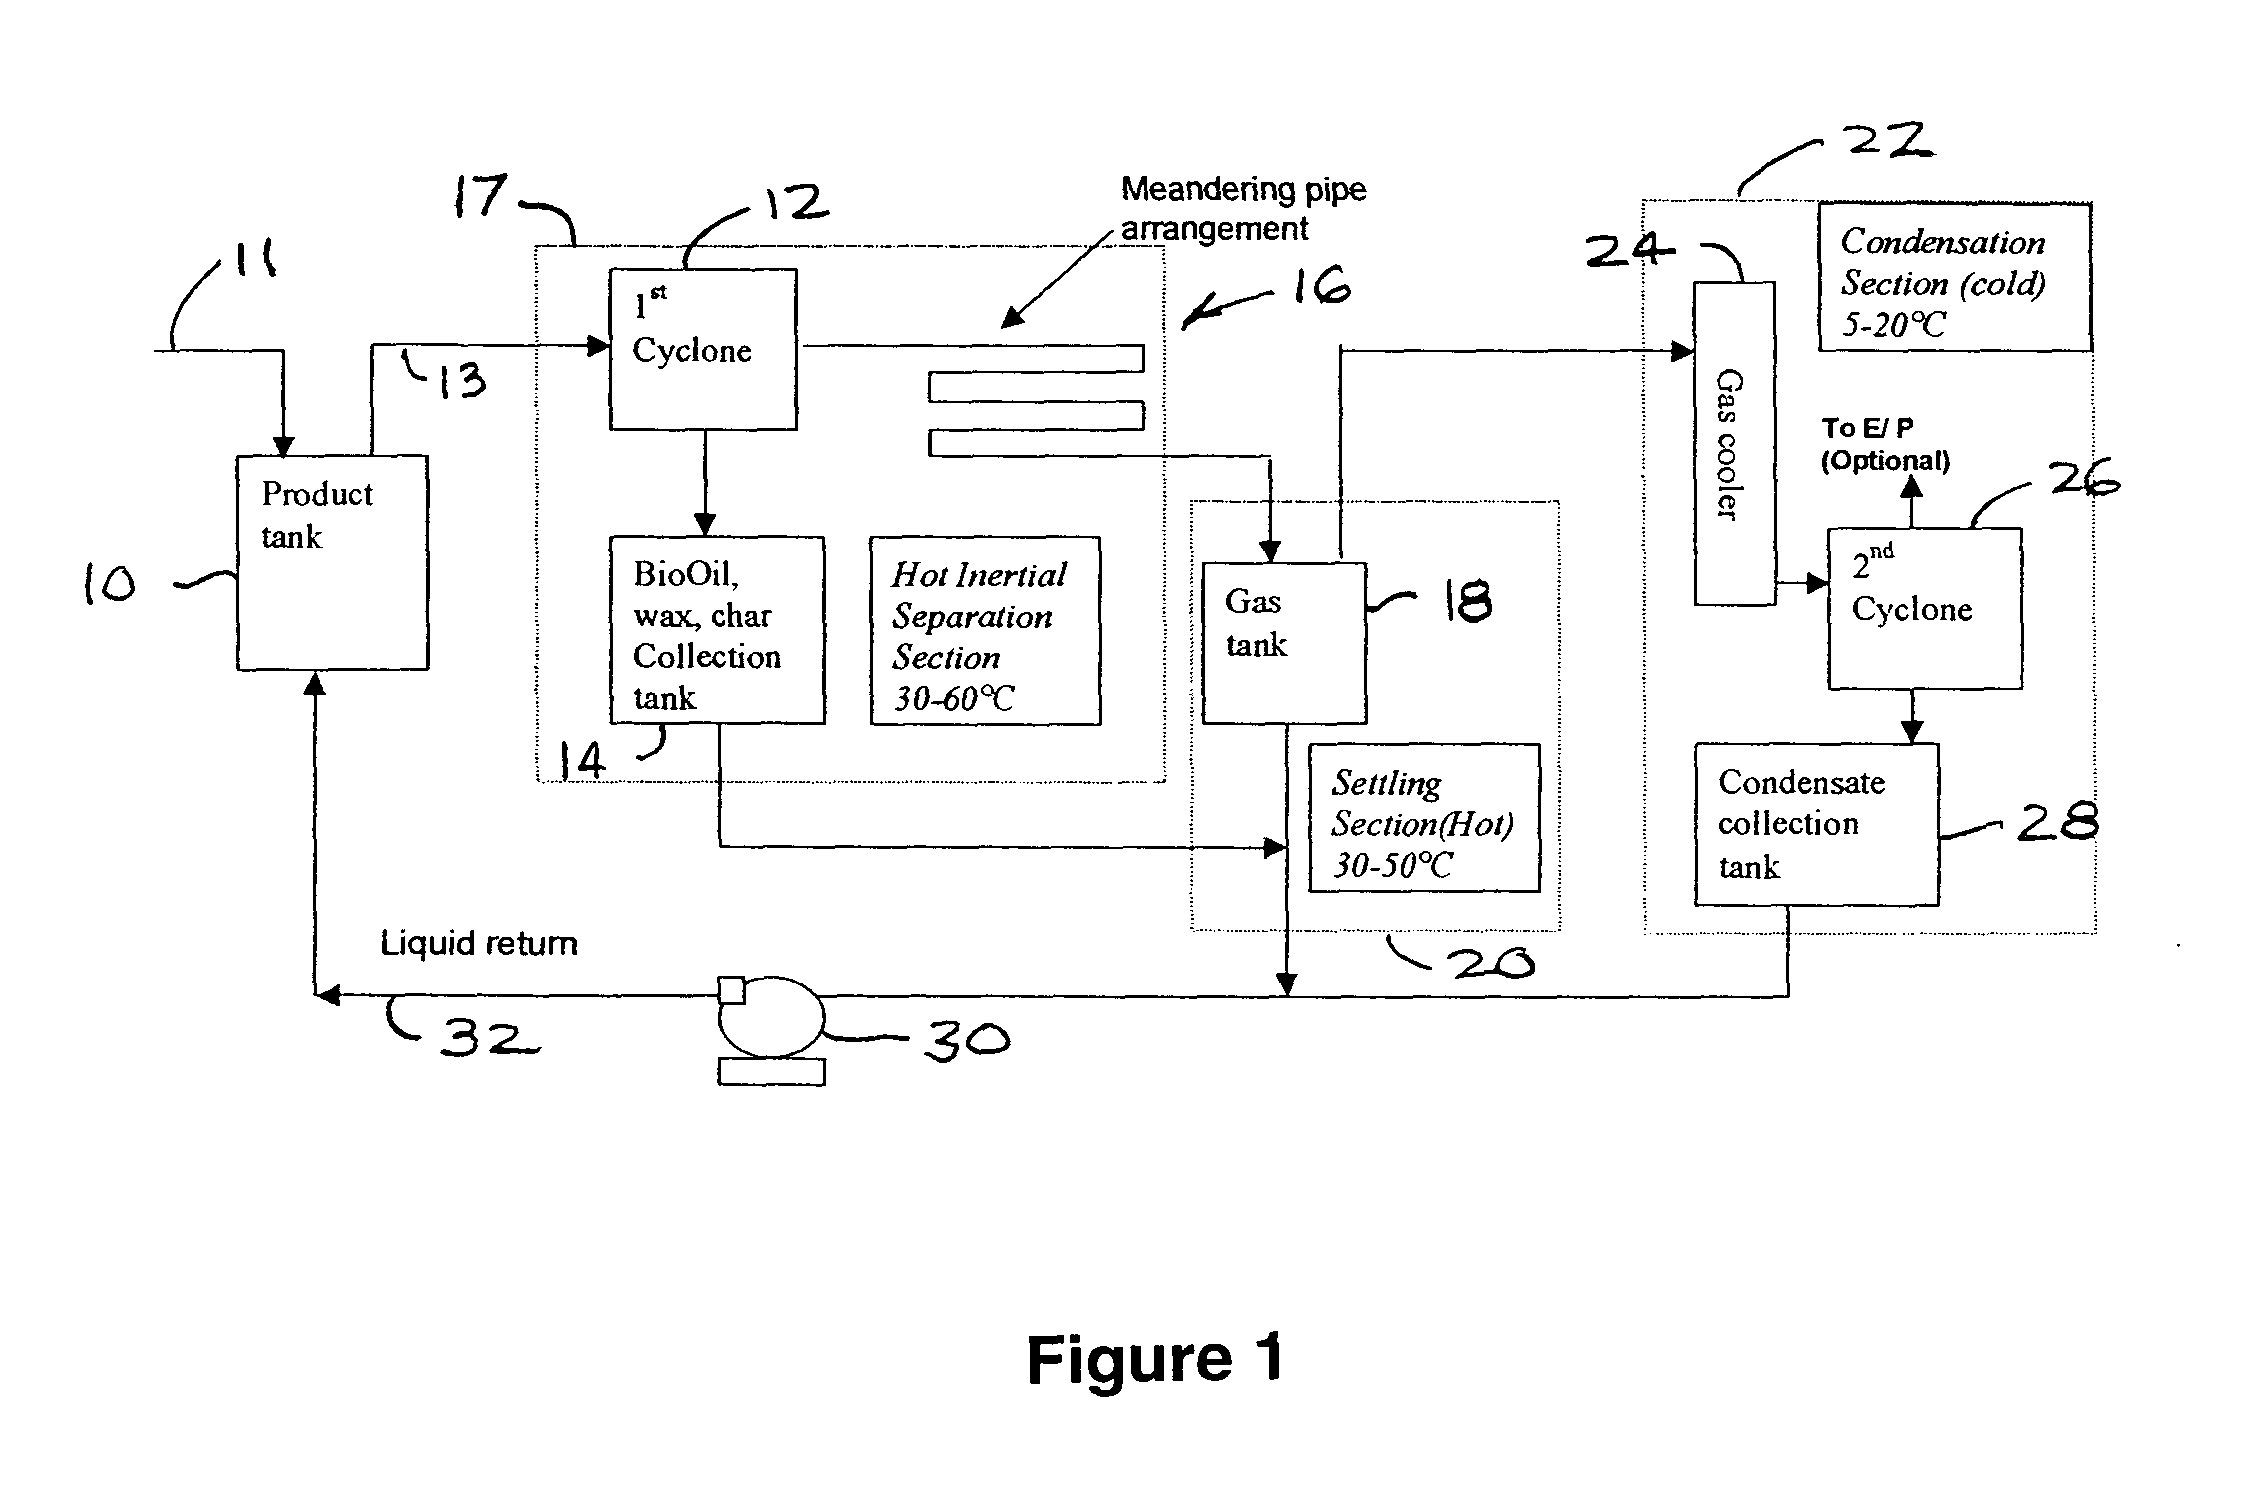 Apparatus for separating fouling contaminants from non-condensable gases at the end of a pyrolysis/thermolysis of biomass process